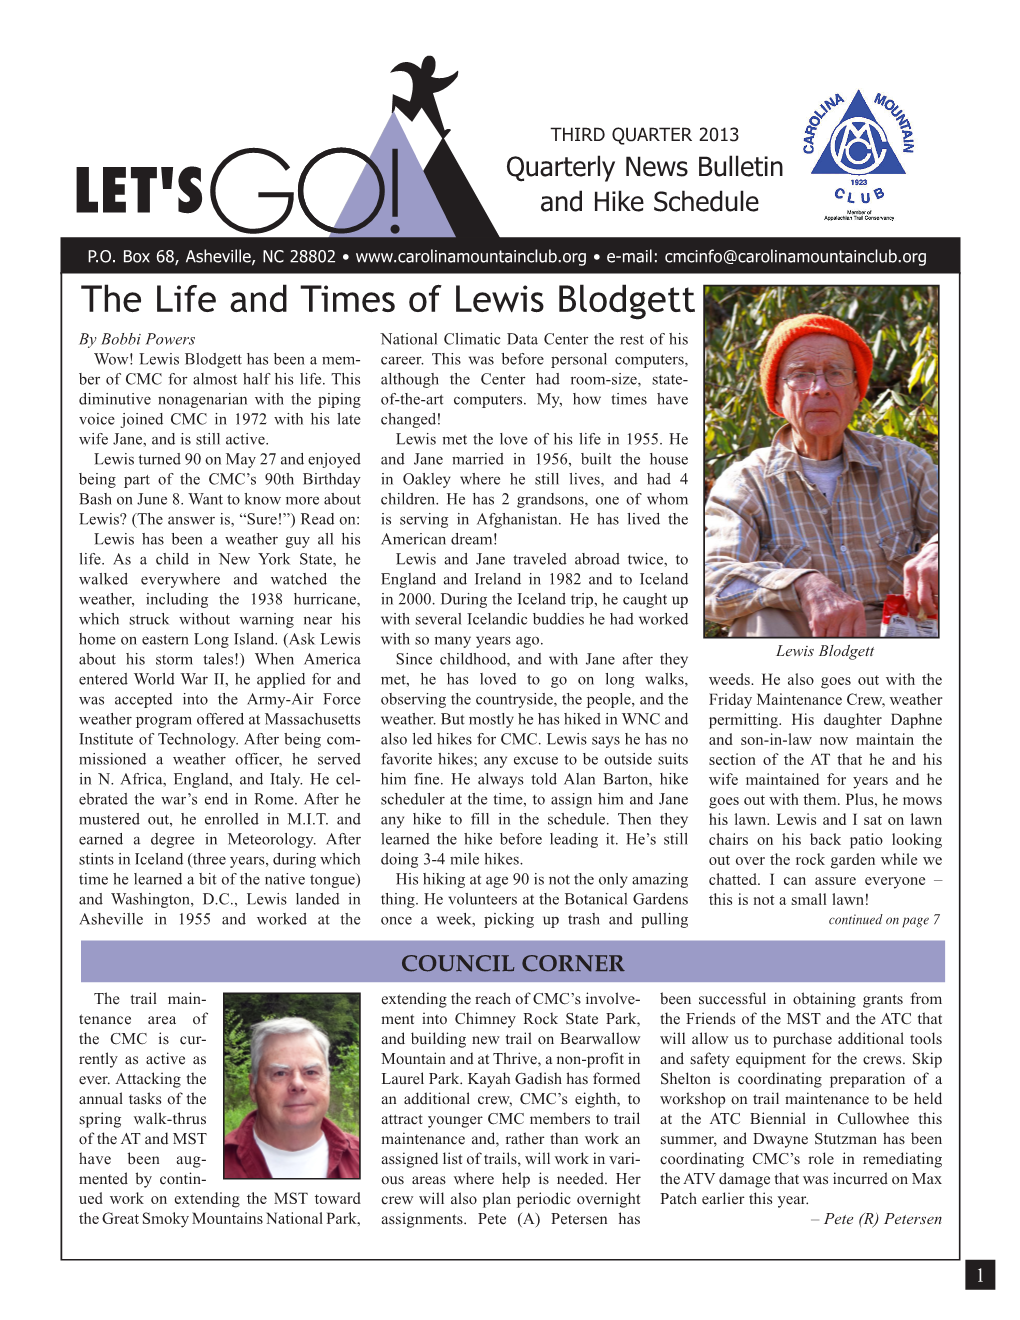 The Life and Times of Lewis Blodgett by Bobbi Powers National Climatic Data Center the Rest of His Wow! Lewis Blodgett Has Been a Mem- Career